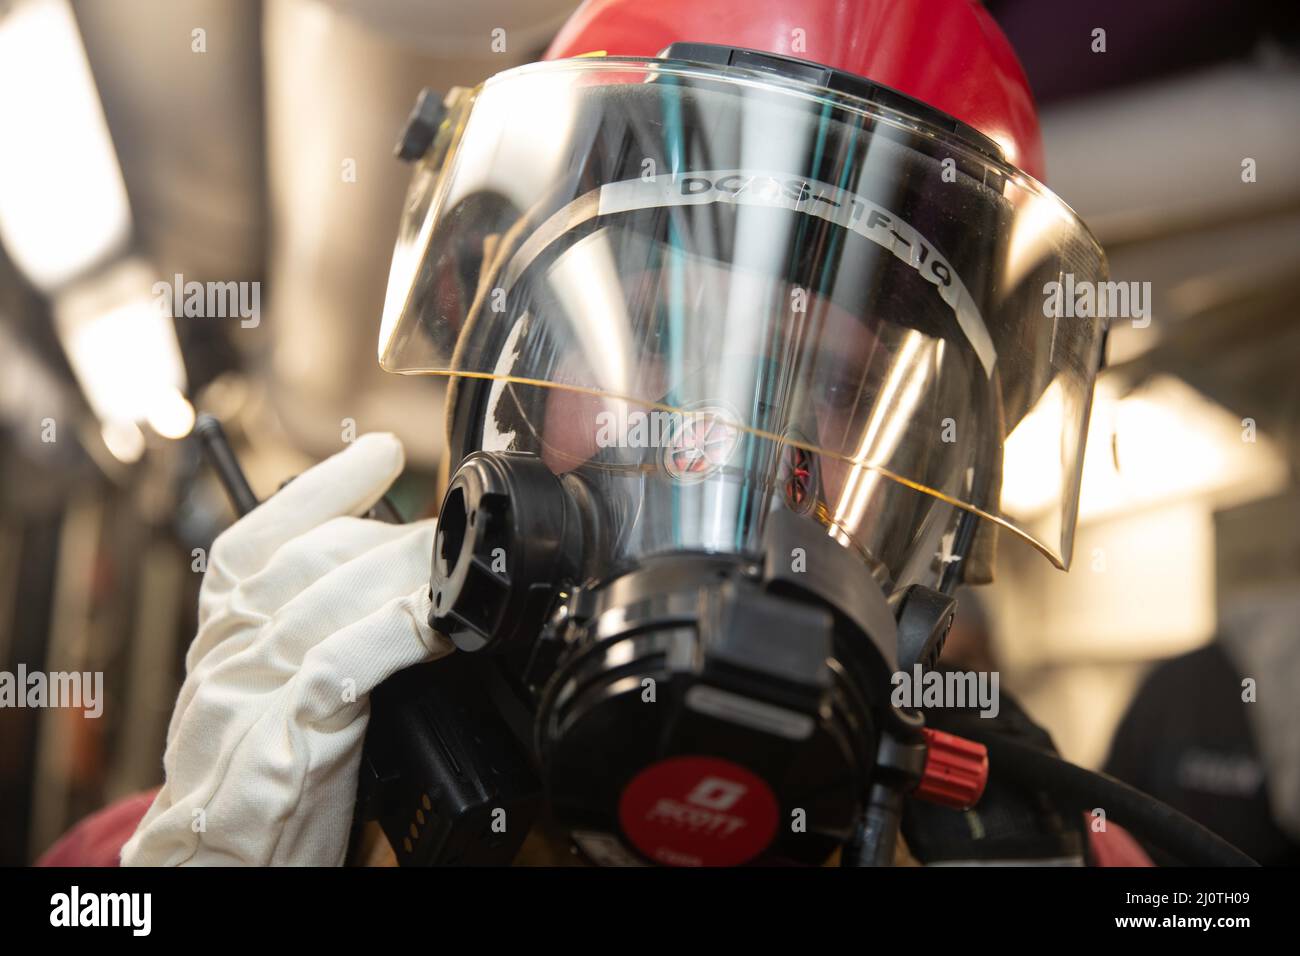 220511-N-PA815-1077  NEWPORT NEWS, Va. (Jan. 25, 2021) - Damage Controlman 3rd Class Trevor P. Conyers, assigned to the engineering department aboard the Nimitz-class aircraft carrier USS George Washington (CVN 73), communicates with repair locker 1B during an integrated class bravo fire drill aboard the ship. George Washington is currently undergoing refueling complex overhaul (RCOH) at Newport News Shipbuilding. RCOH is a multi-year project performed only once during a carrier’s 50-year service life that includes refueling the ship’s two nuclear reactors, as well as significant repairs, upgr Stock Photo